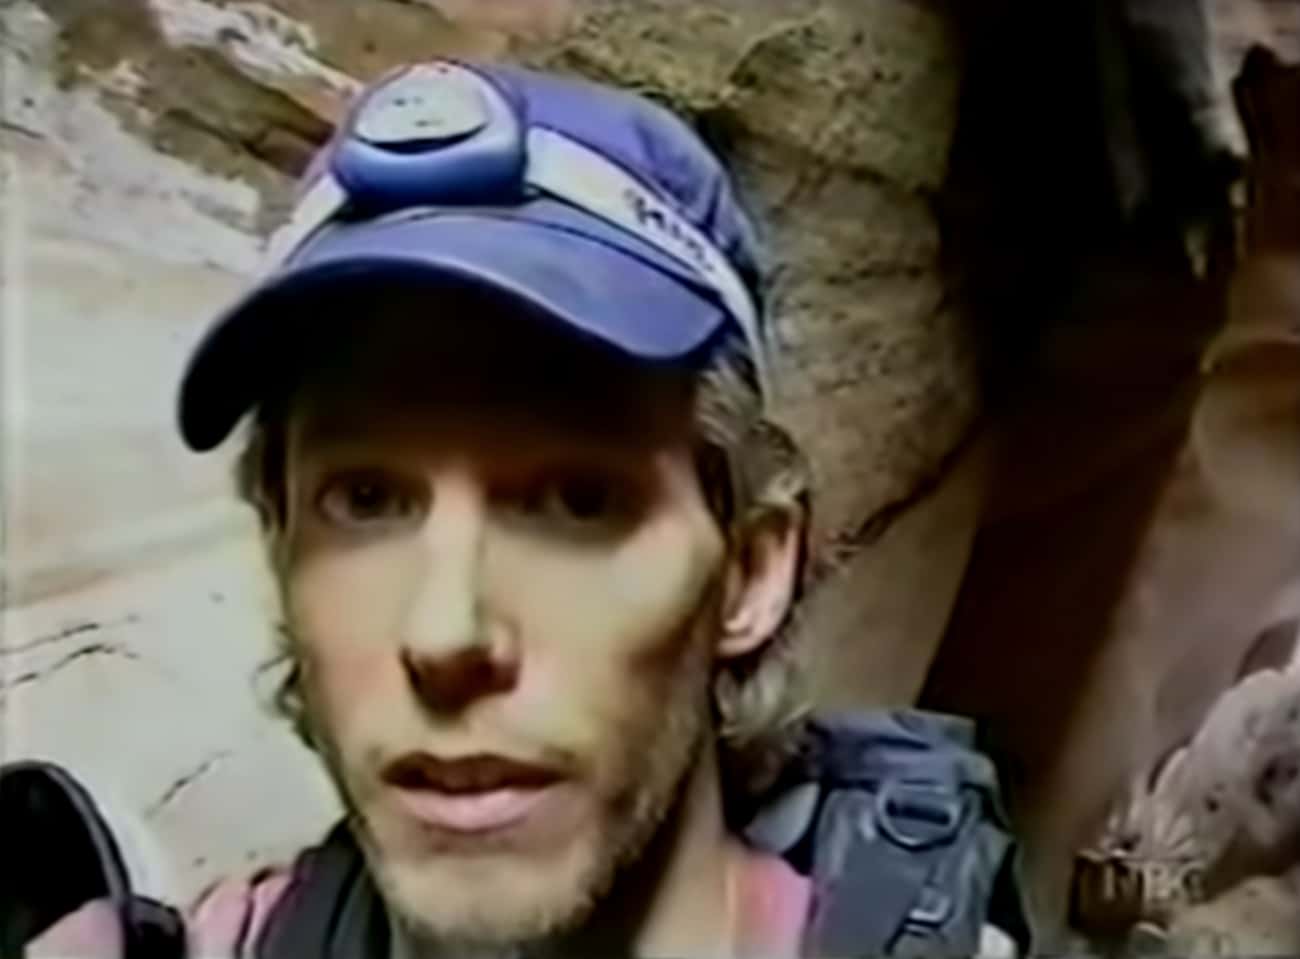 Aron Ralston Cut Off His Own Arm To Save His Life